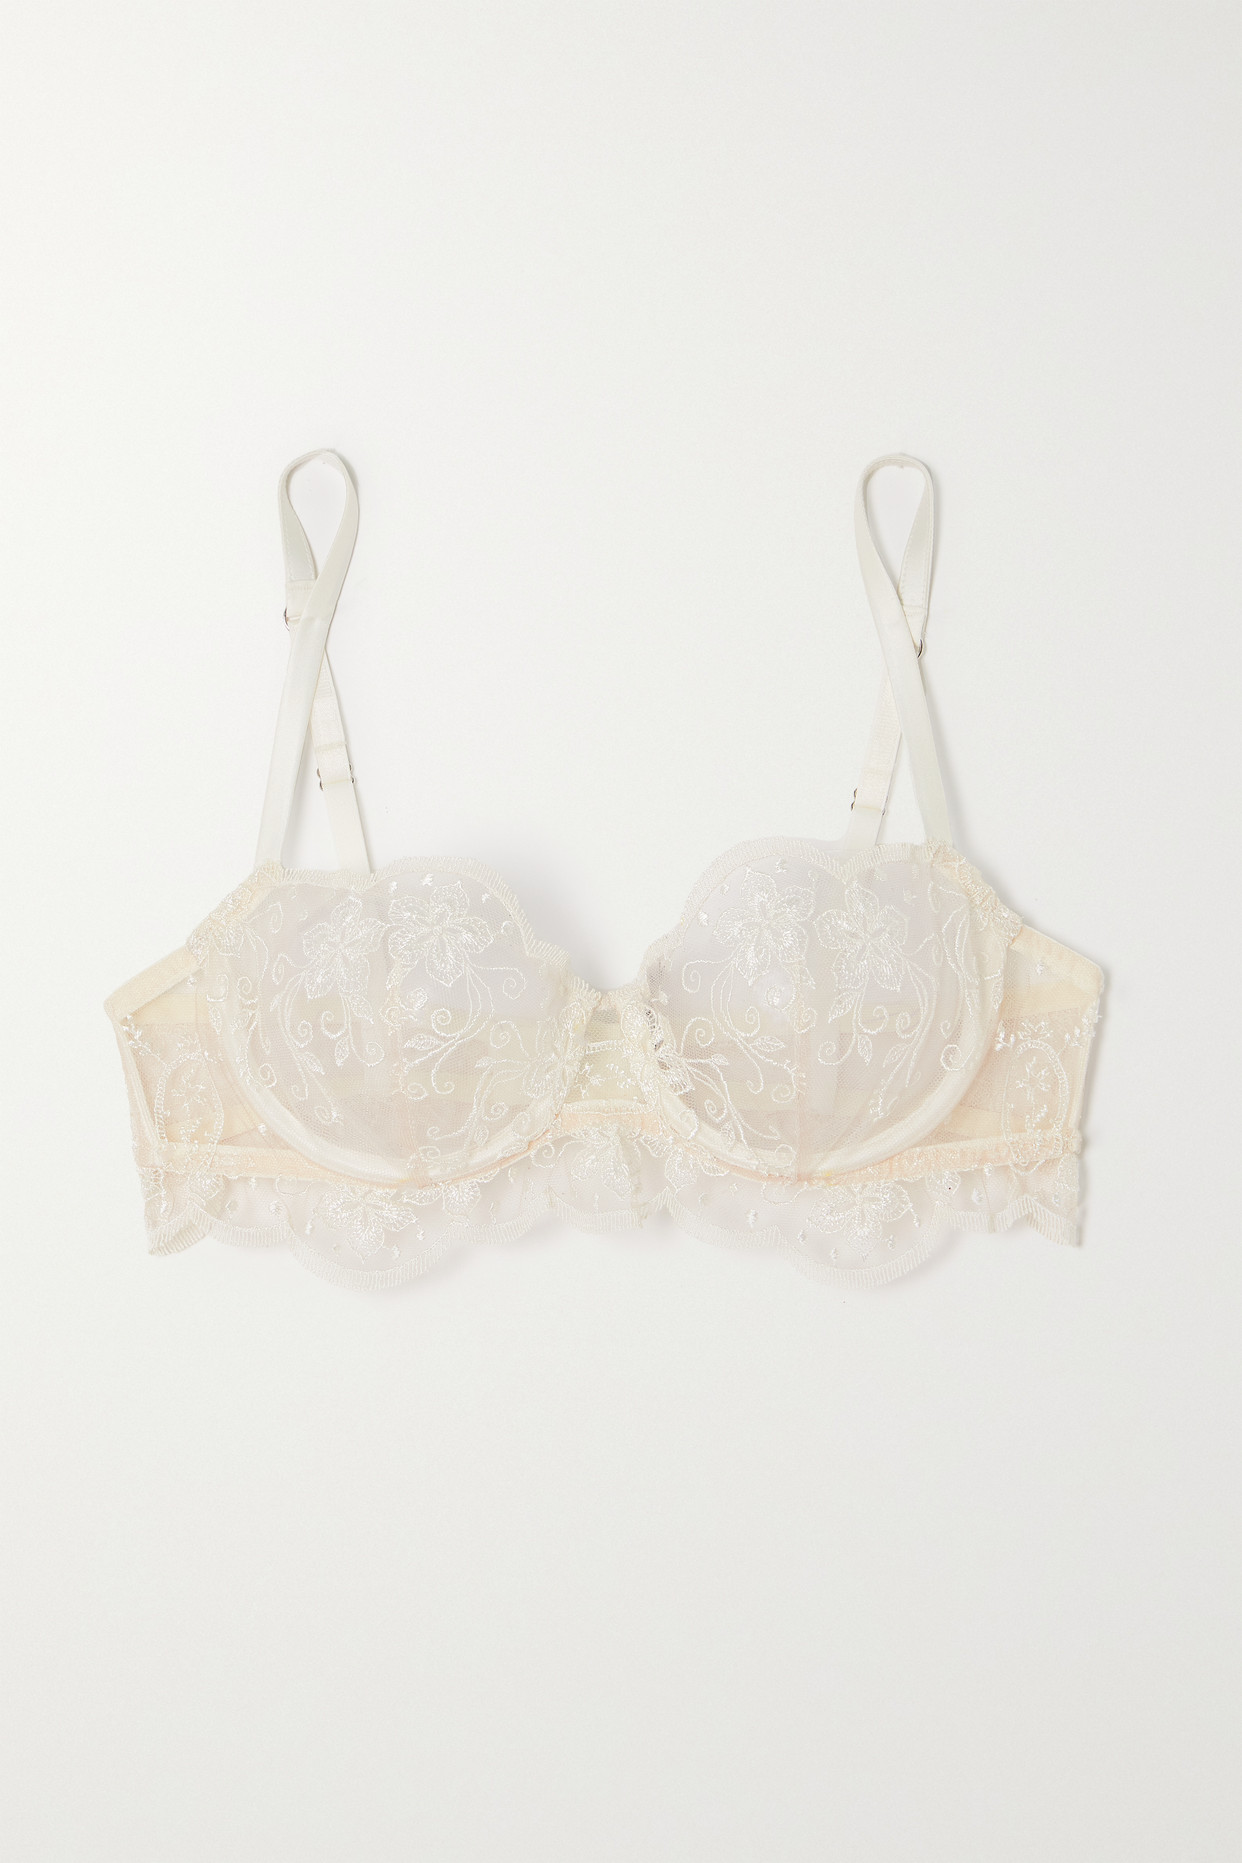 + Net Sustain Tubereuse Blanche Satin-Trimmed Embroidered Tulle Underwired Bra